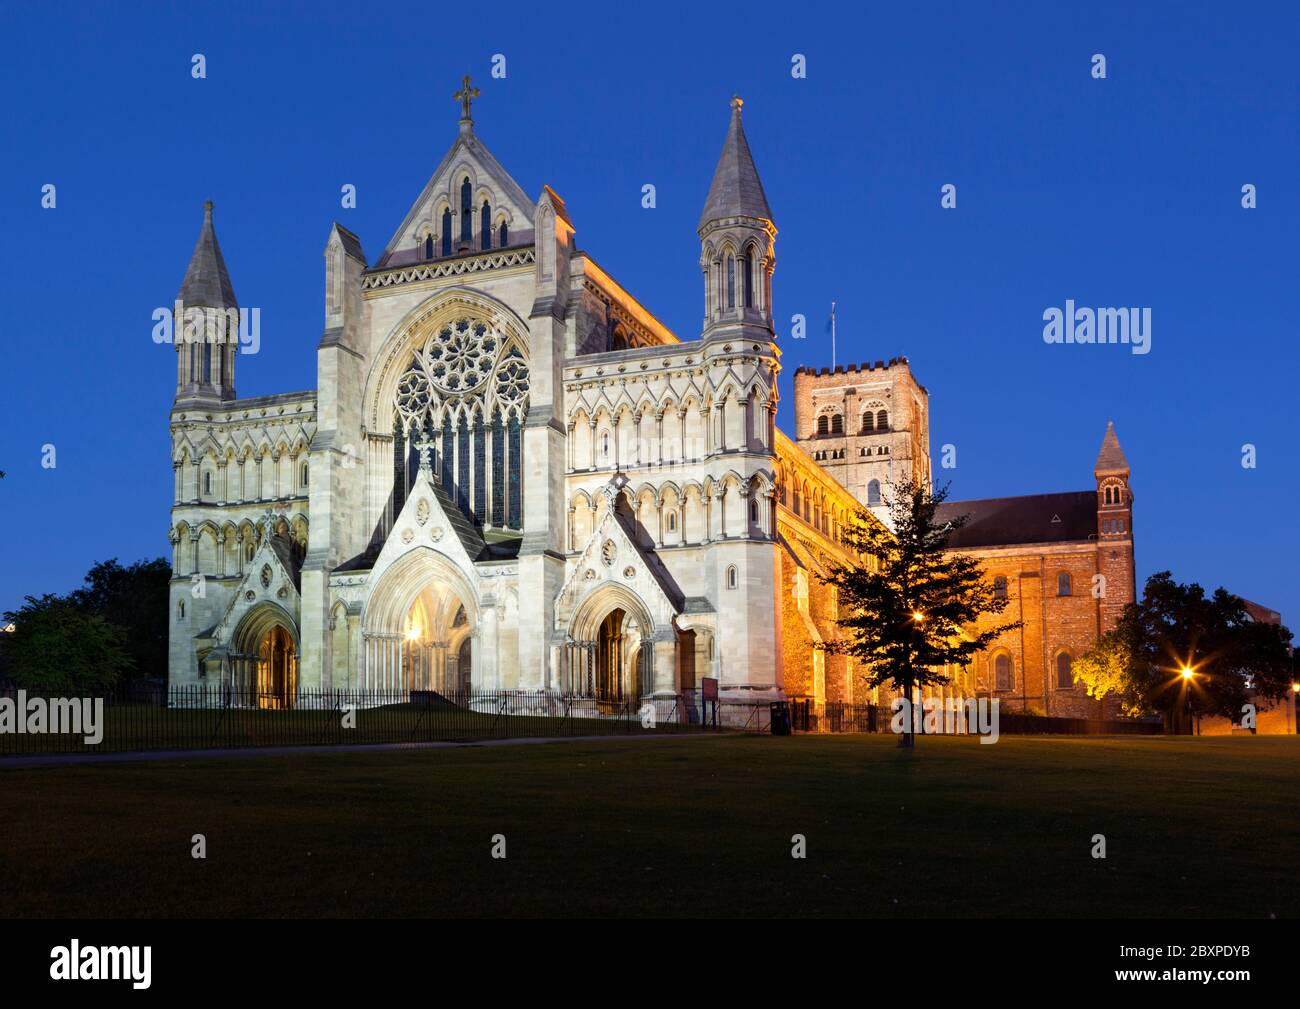 Cathedral and Abbey Church of Saint Alban (Britain's first Christian martyr) at night, St Albans, Hertfordshire, England, United Kingdom, Europe Stock Photo